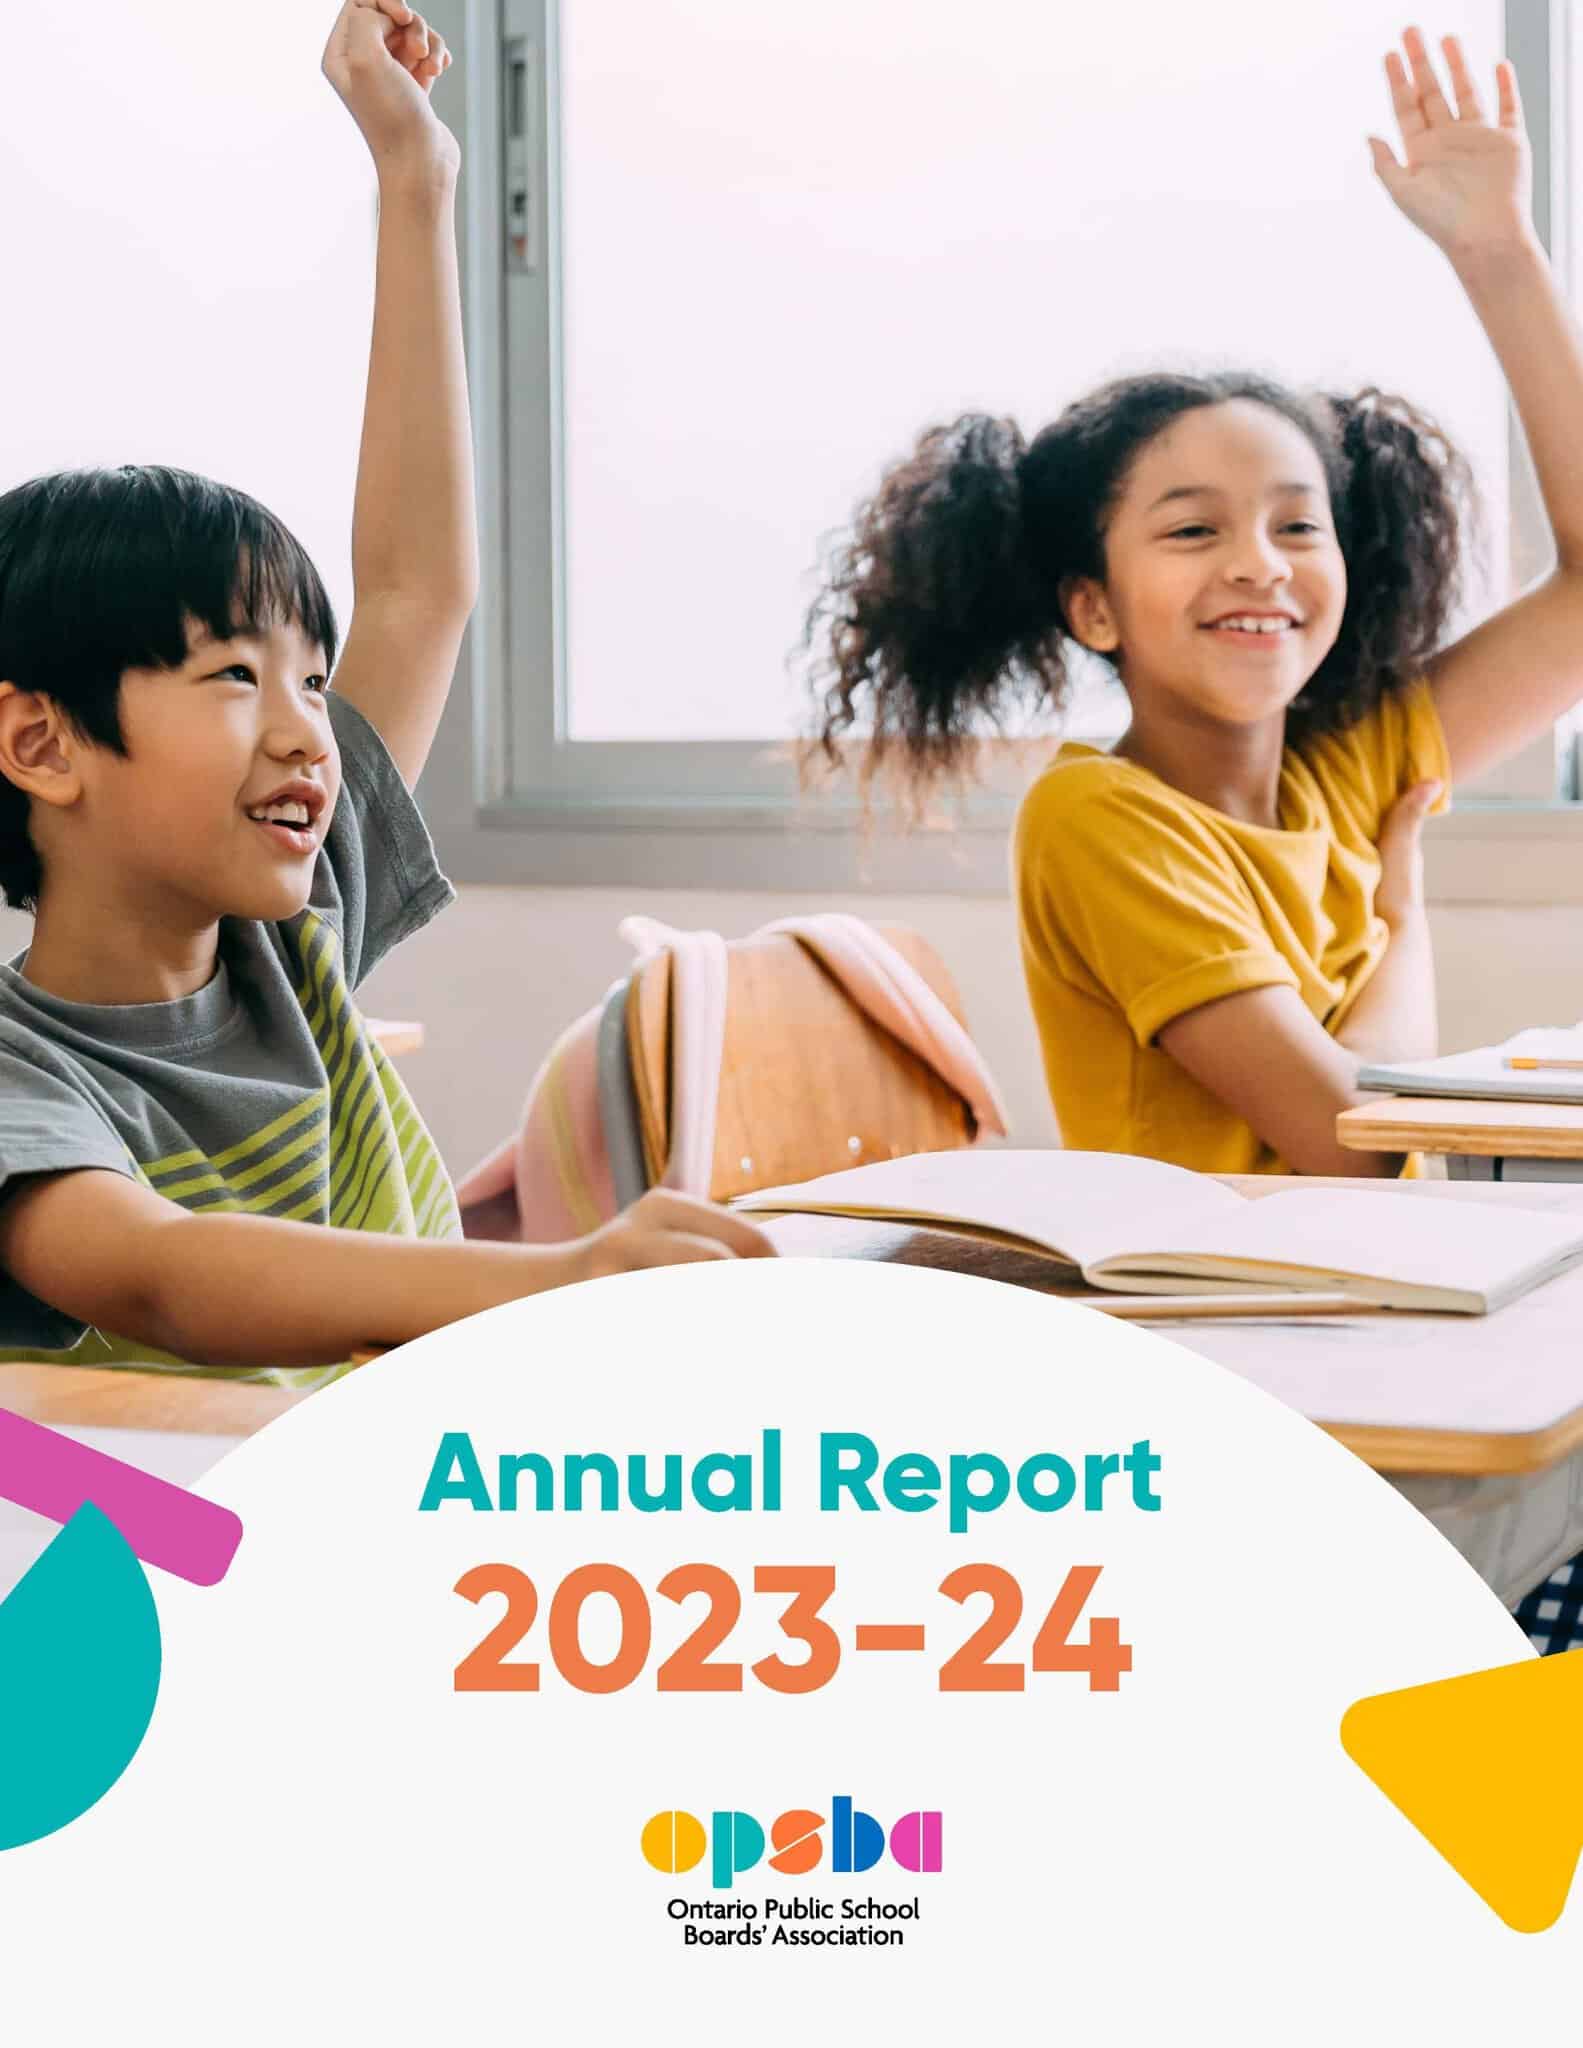 OPSBA Annual Report 2023-24 Cover - features two elementary aged students raising hands in class.